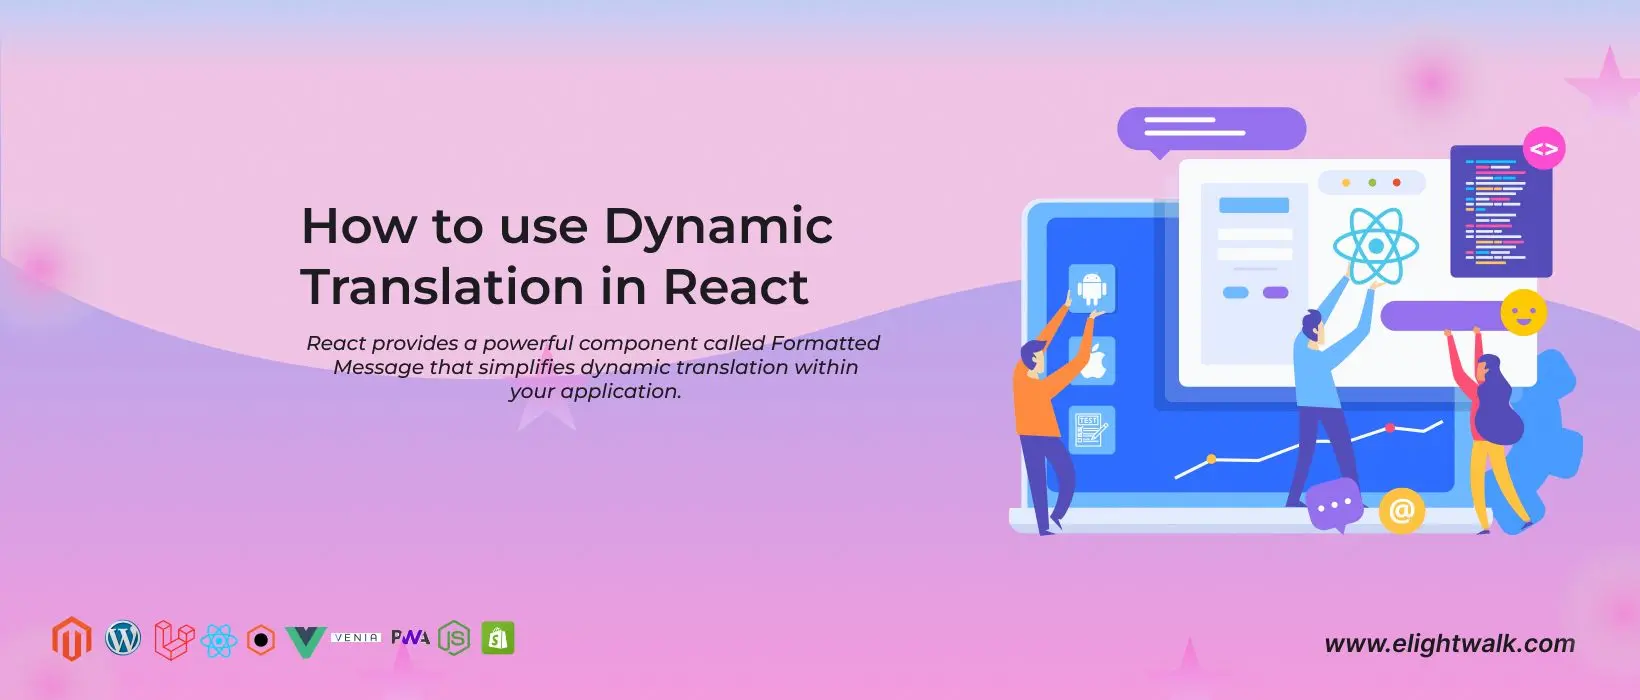 How to use Dynamic Translation in React